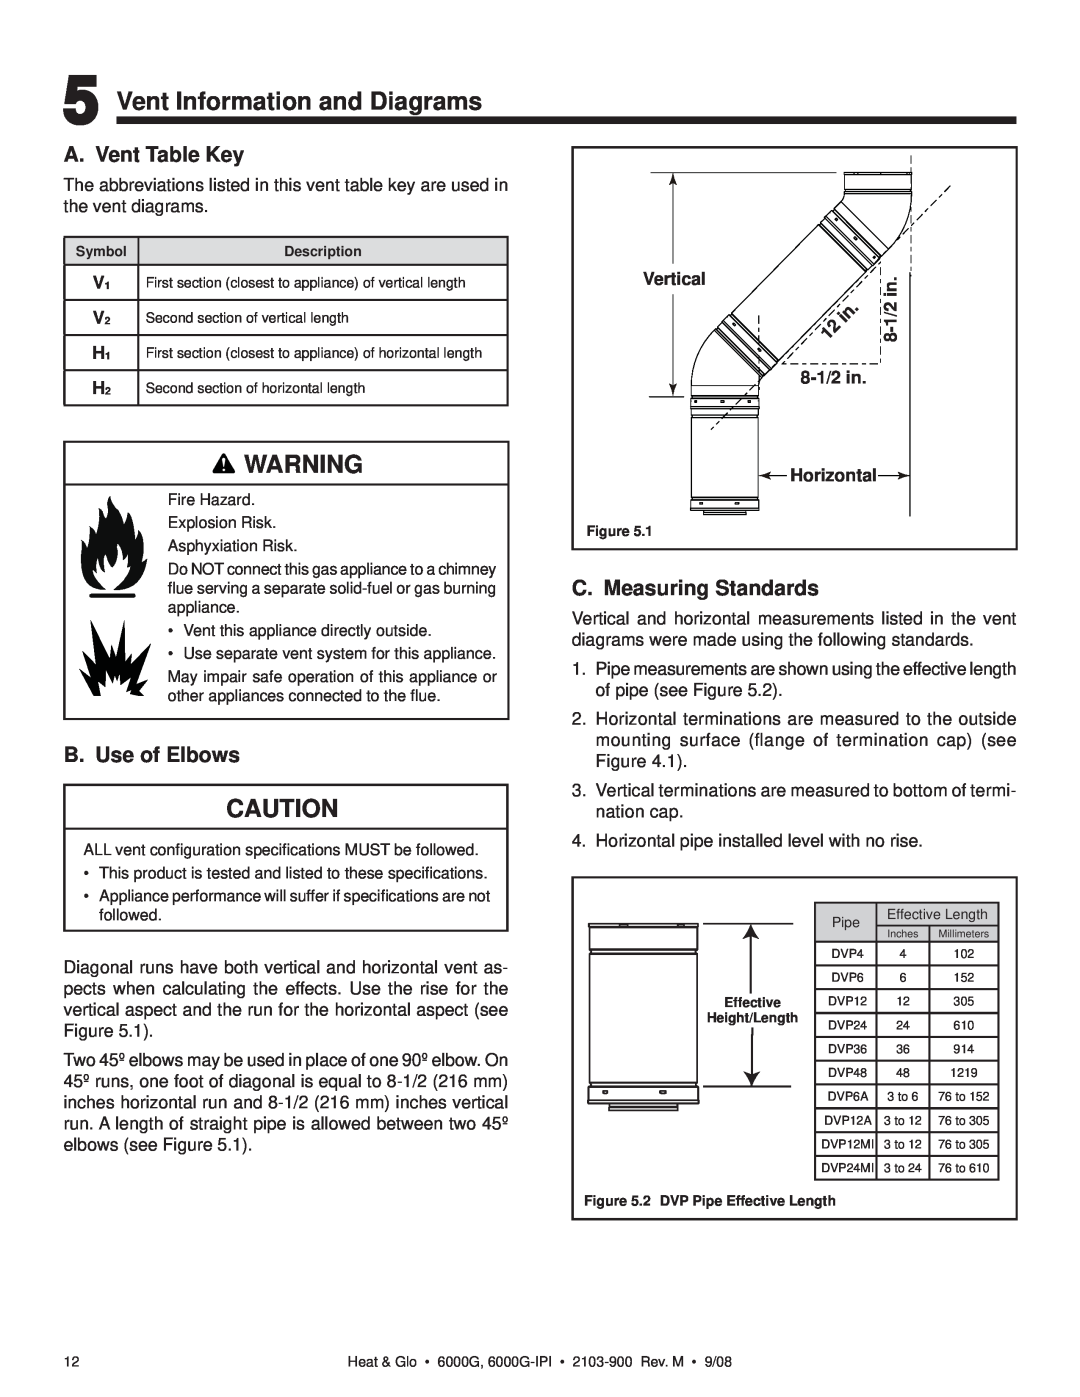 Heat & Glo LifeStyle 6000G-LP Vent Information and Diagrams, A. Vent Table Key, B. Use of Elbows, C. Measuring Standards 